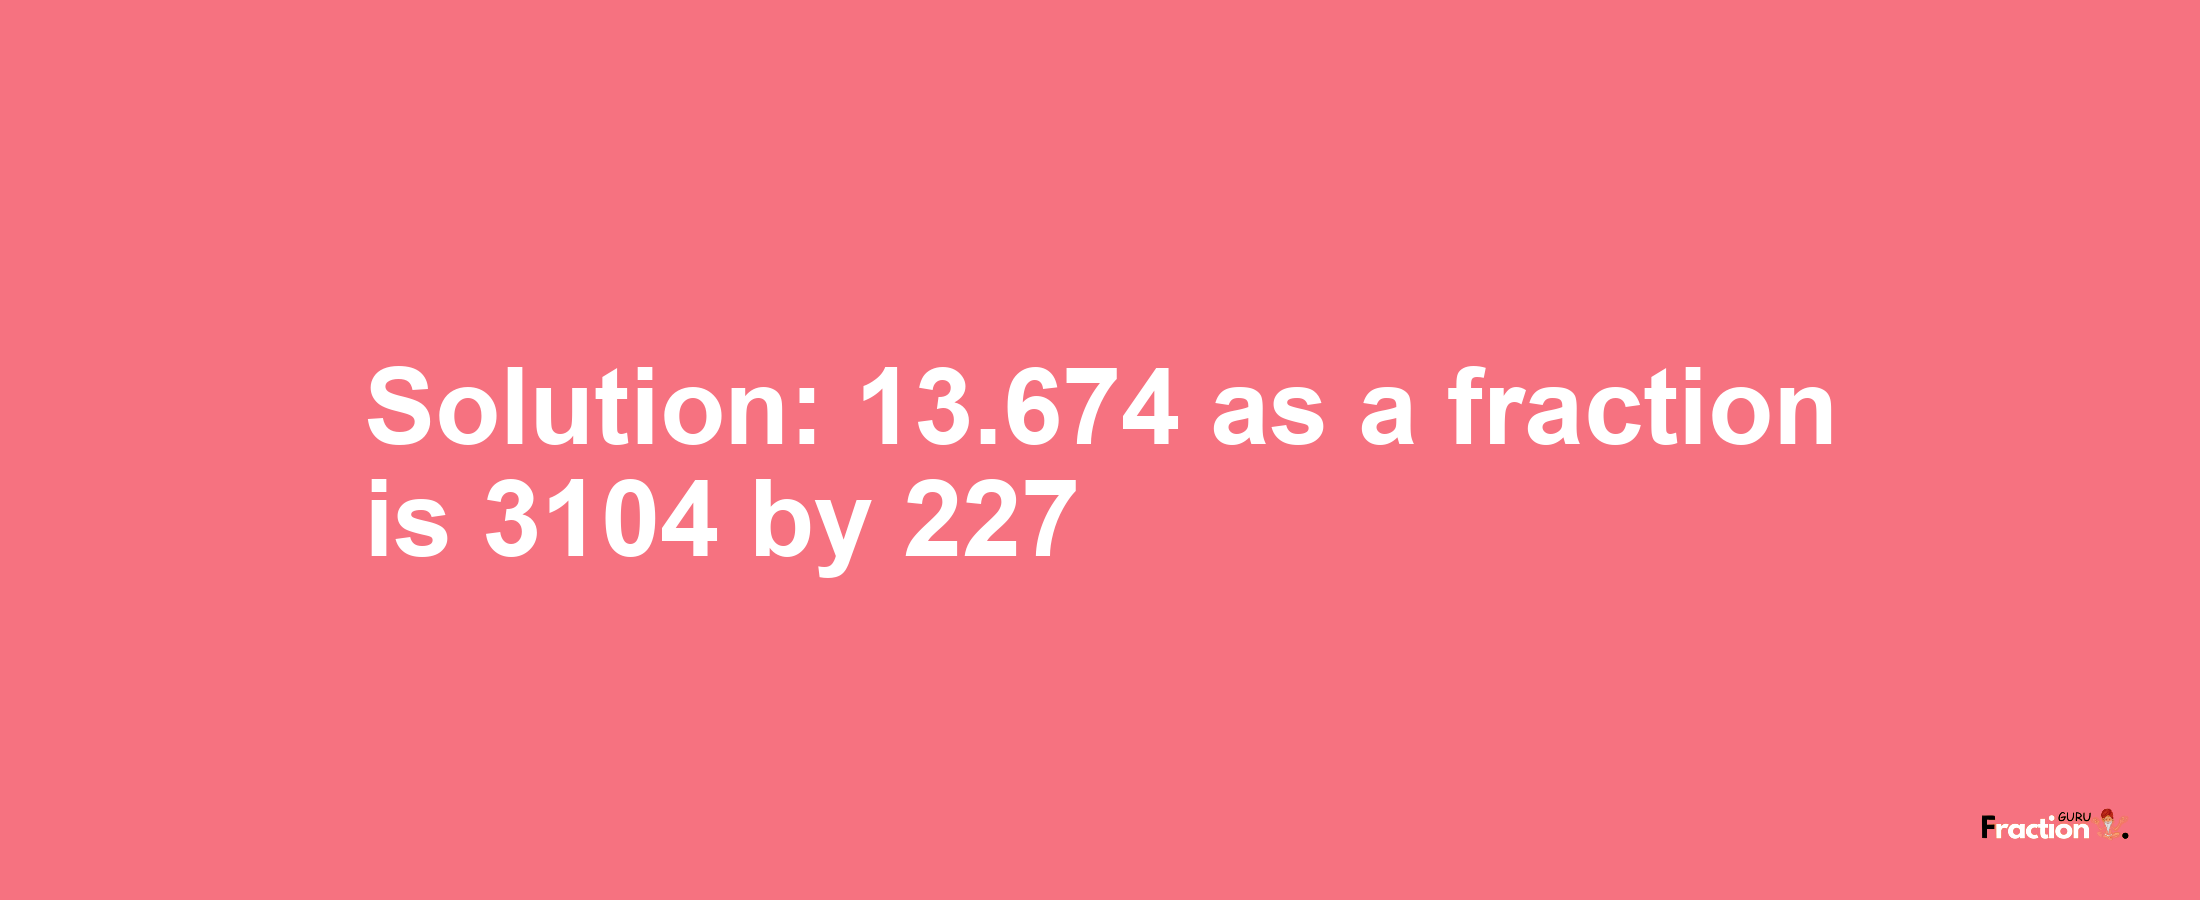 Solution:13.674 as a fraction is 3104/227